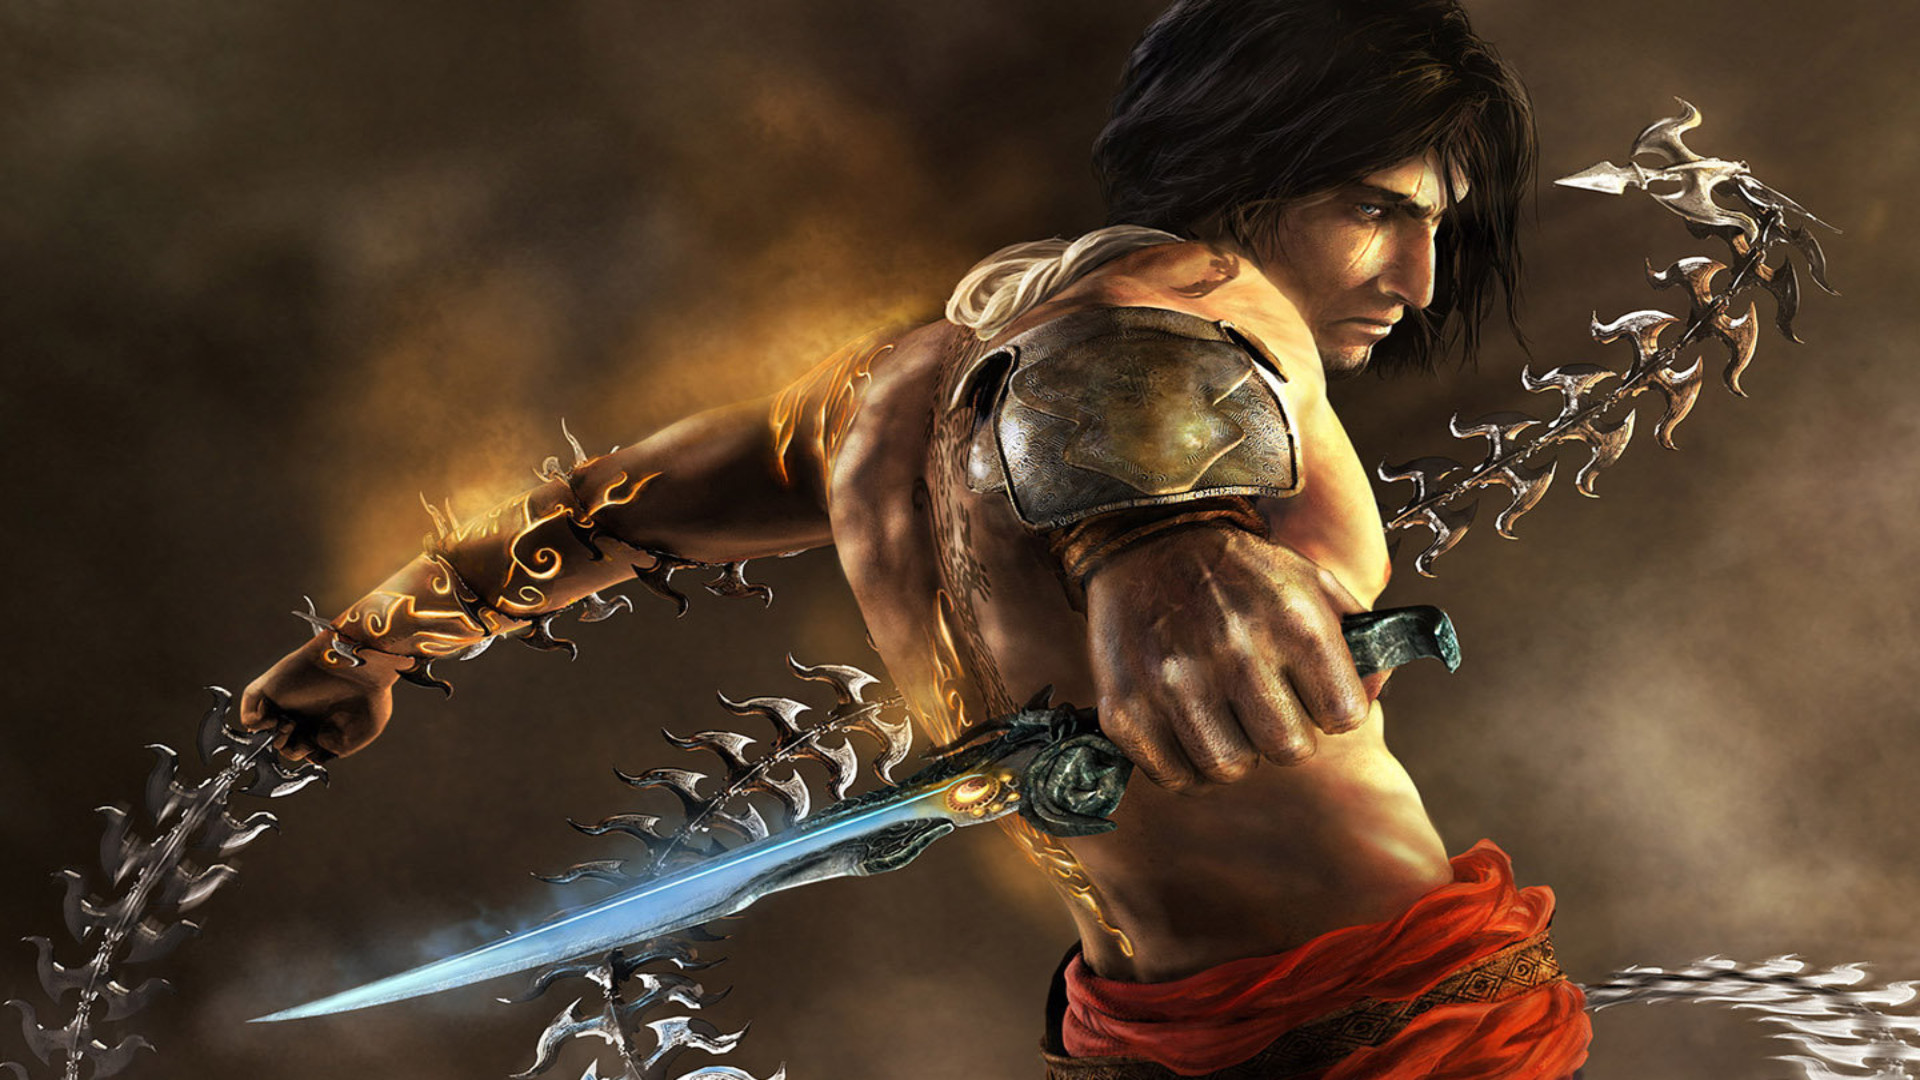 Prince of Persia: The Two Thrones Images - LaunchBox Games Database